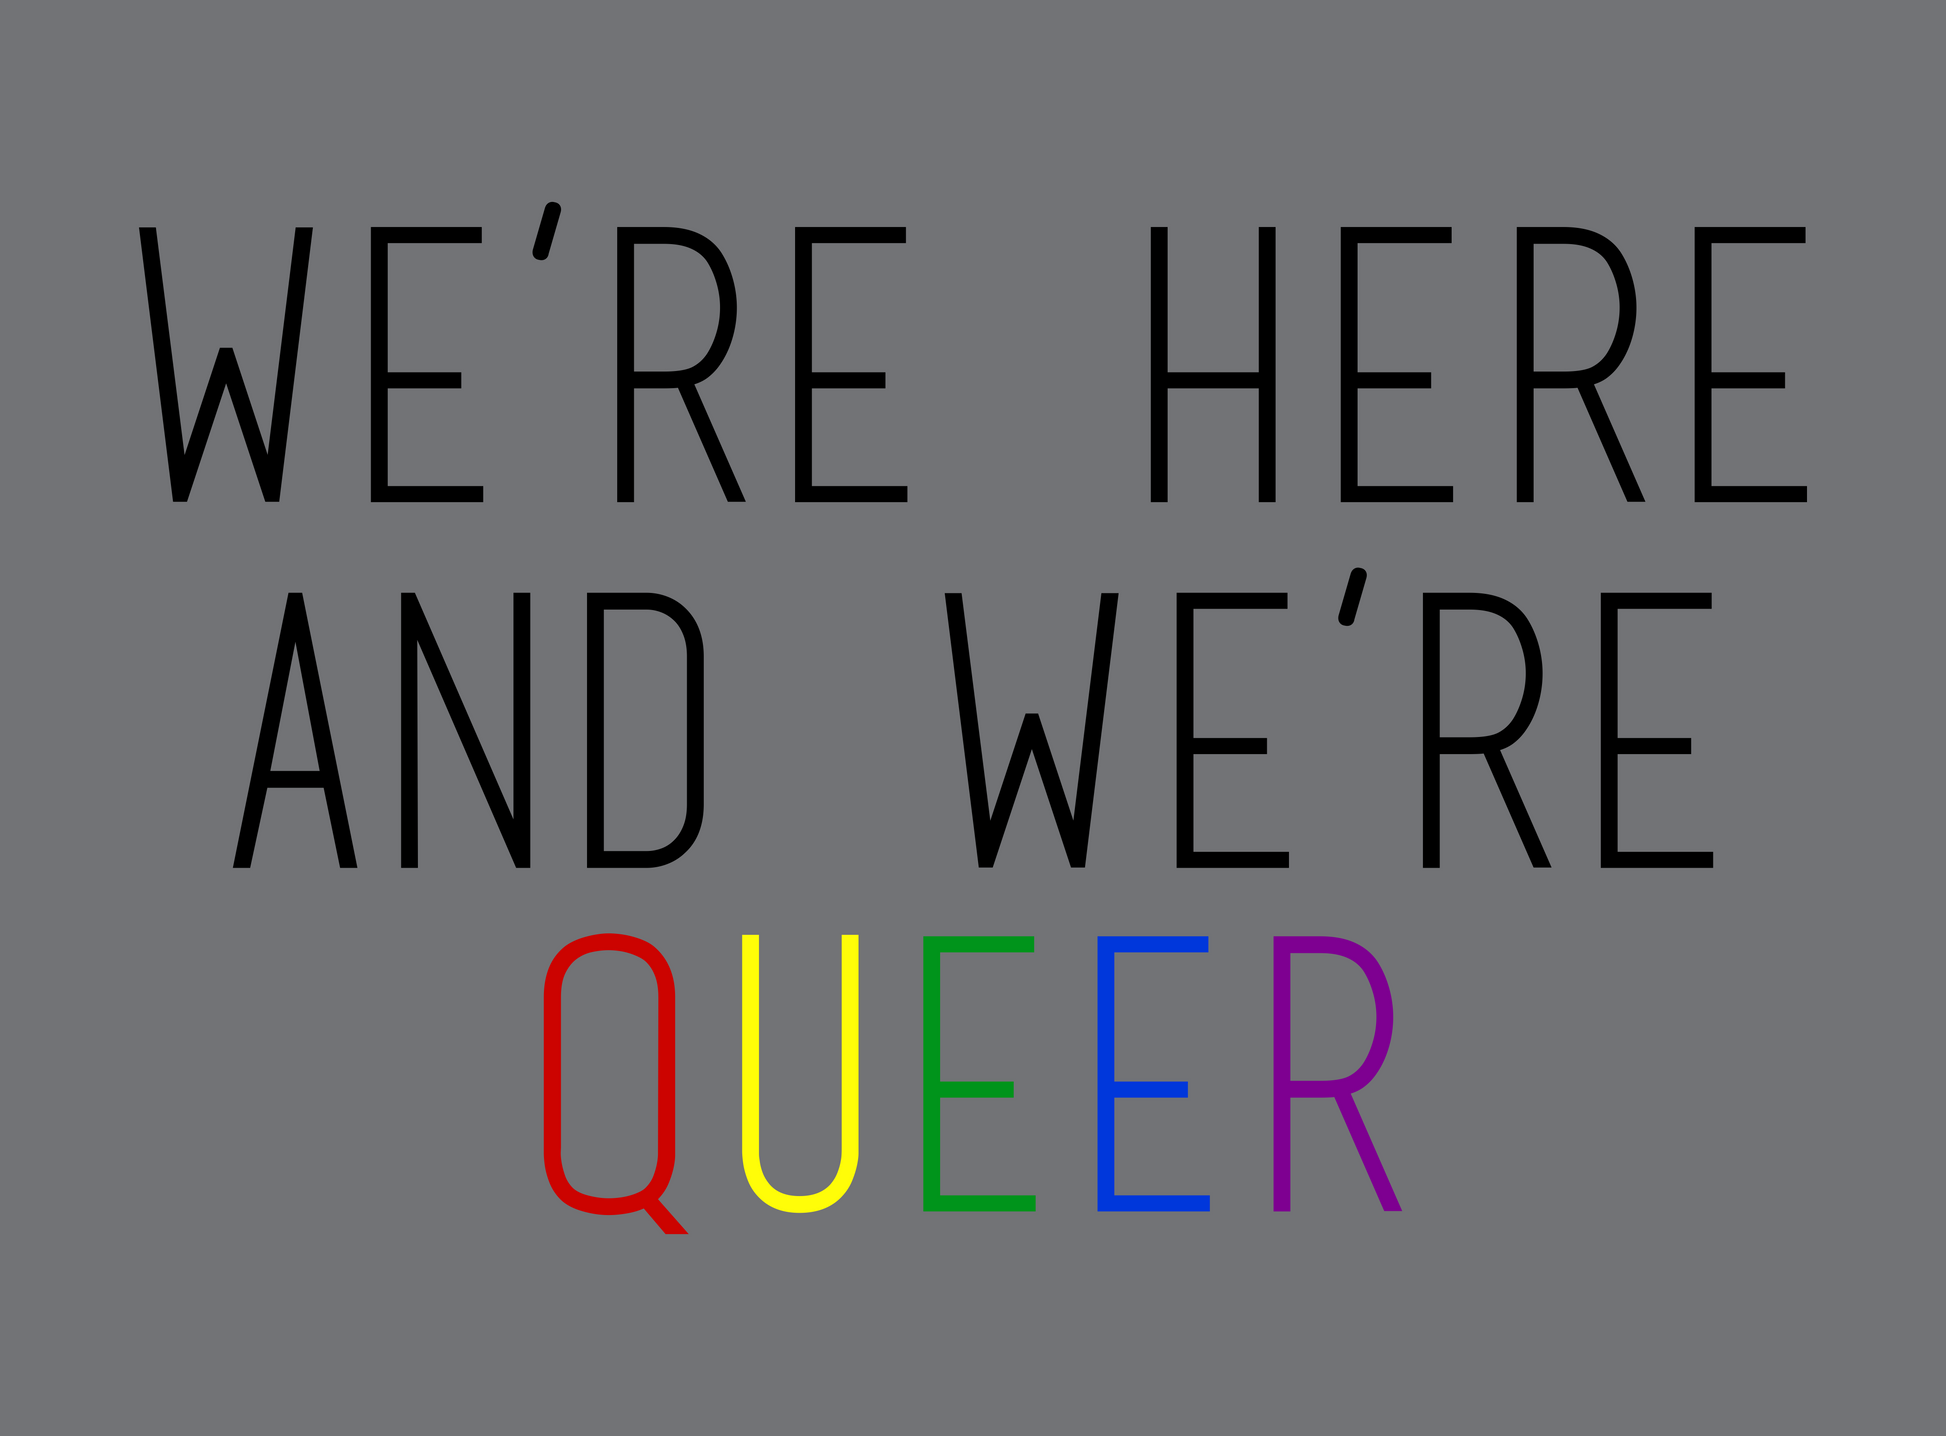 were here and were queer rainbow DTG design graphic